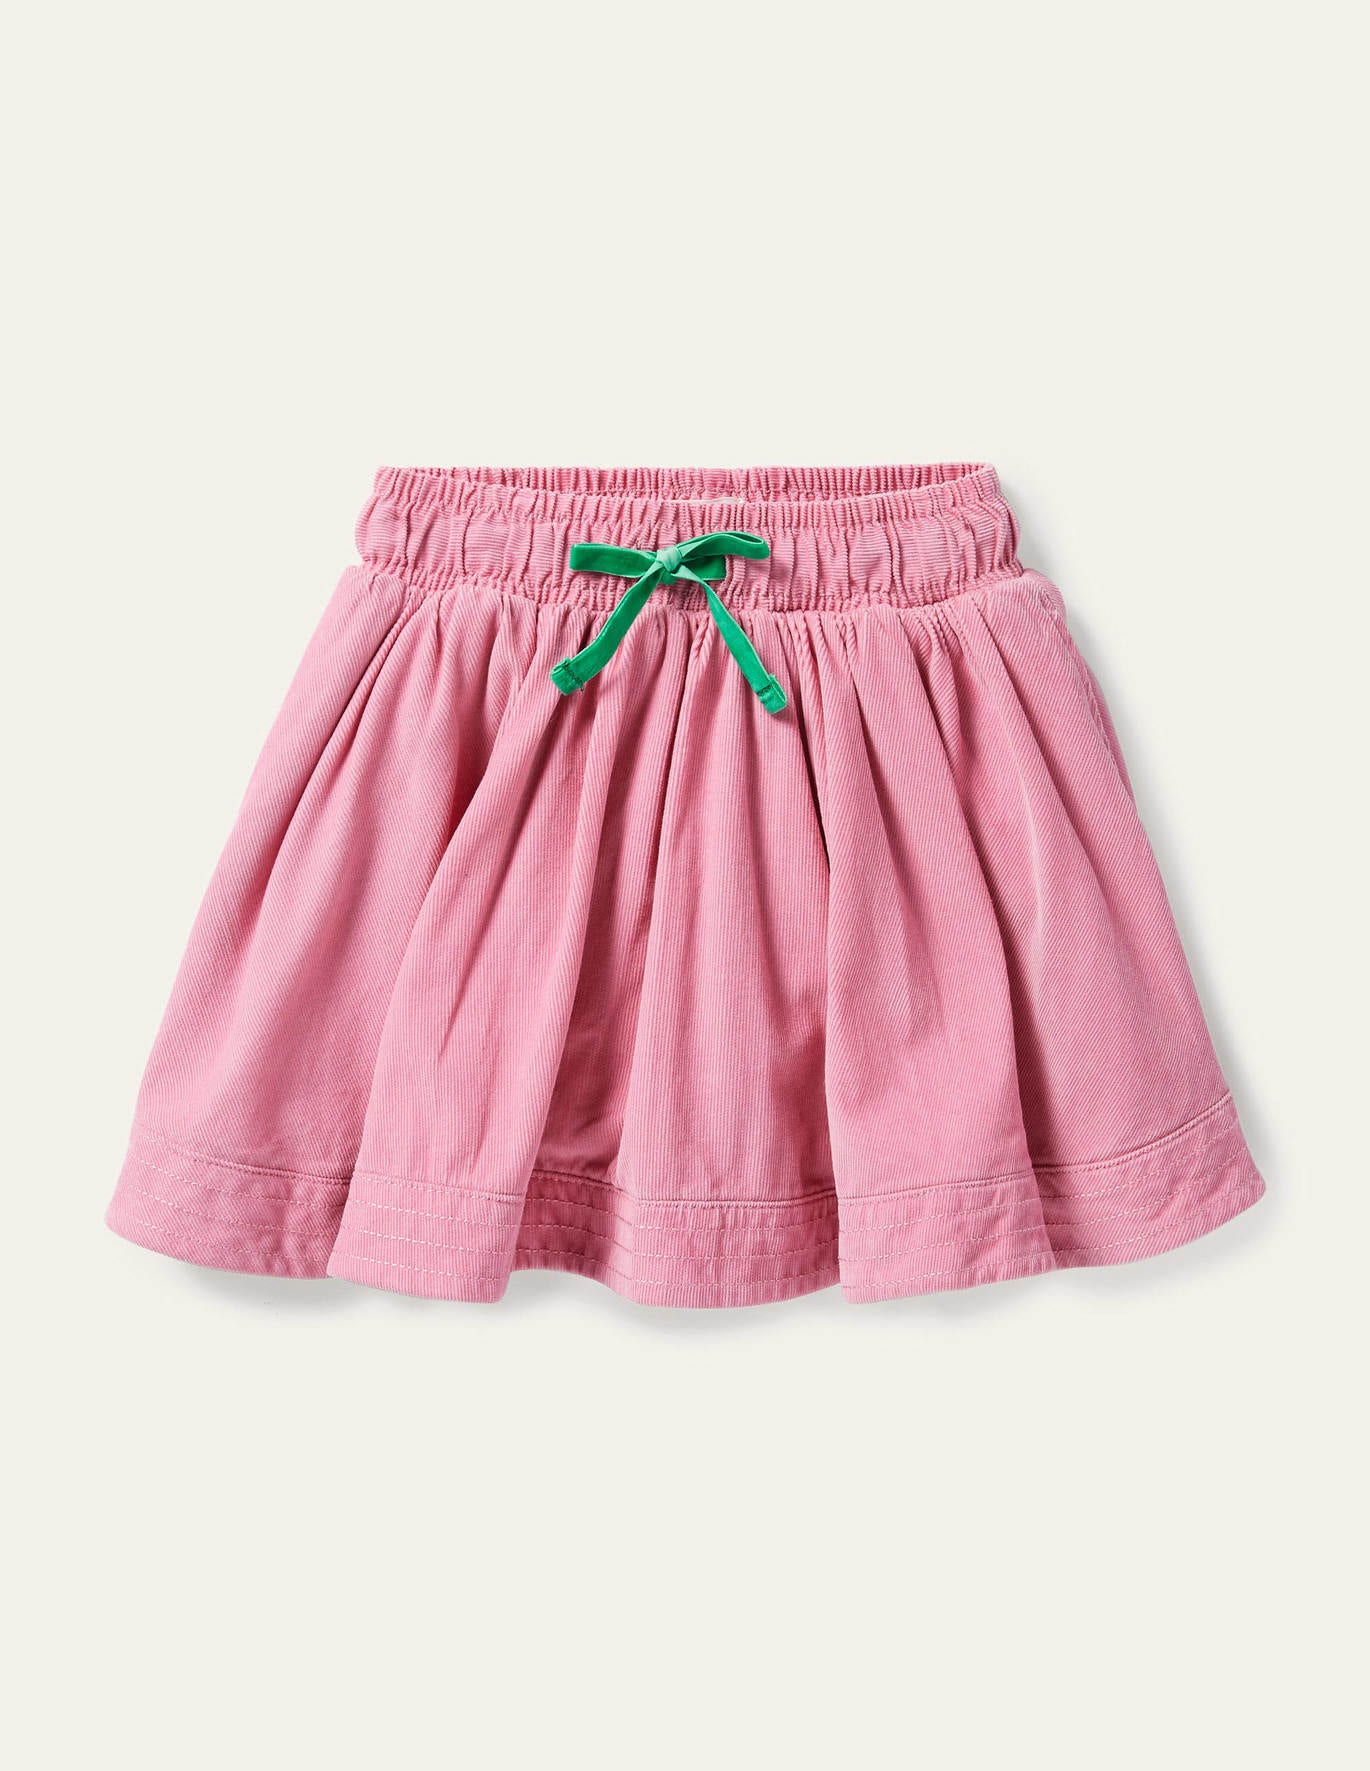 Boden Woven Twirly Skirt - Formica Pink